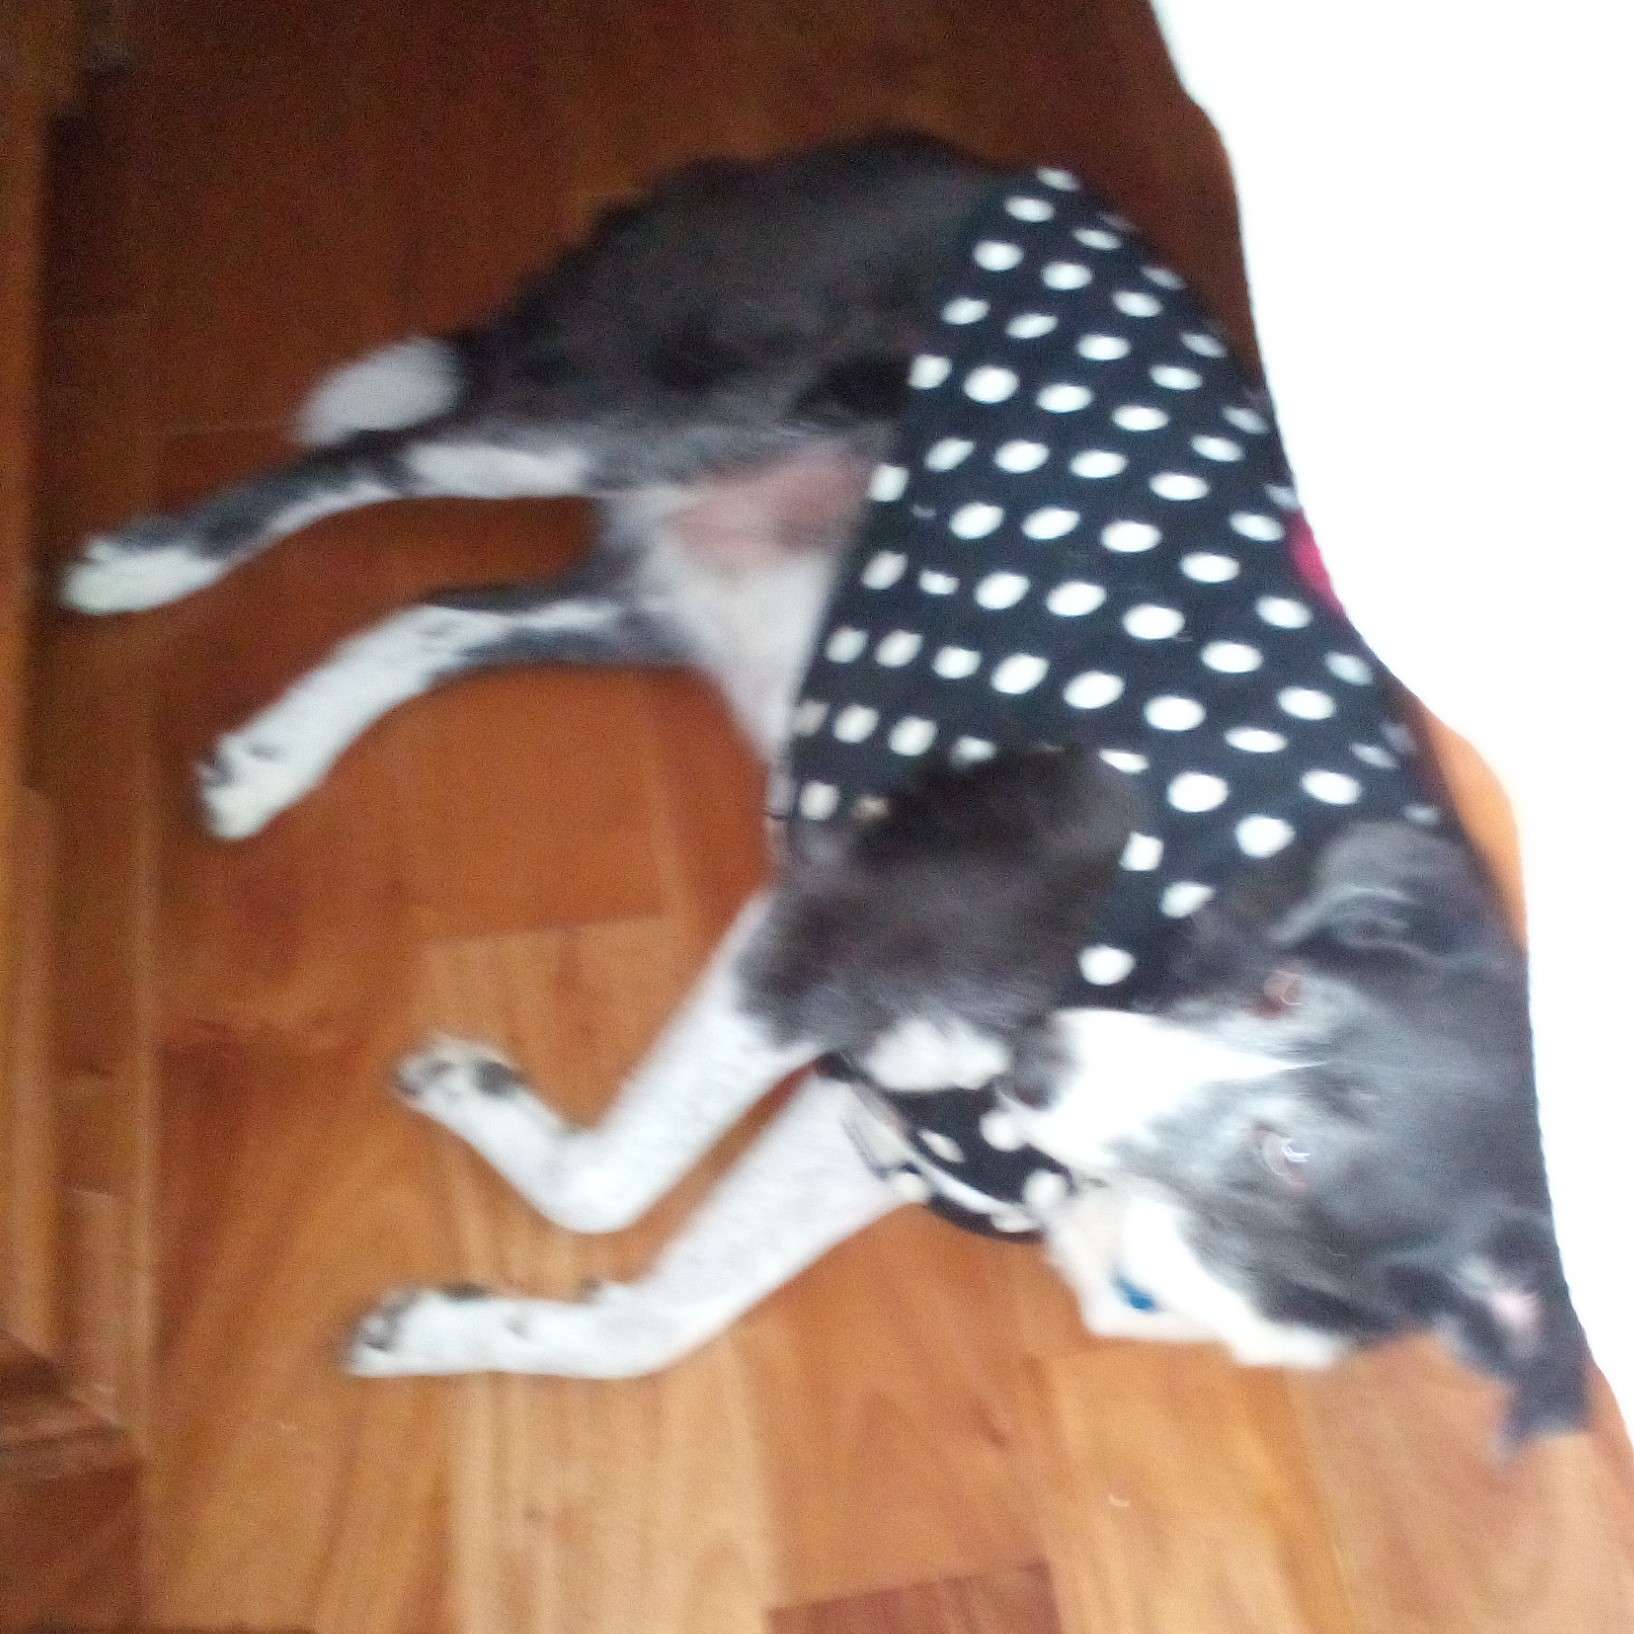 black and white dog, gray with age, wearing black and white polkadot shirt